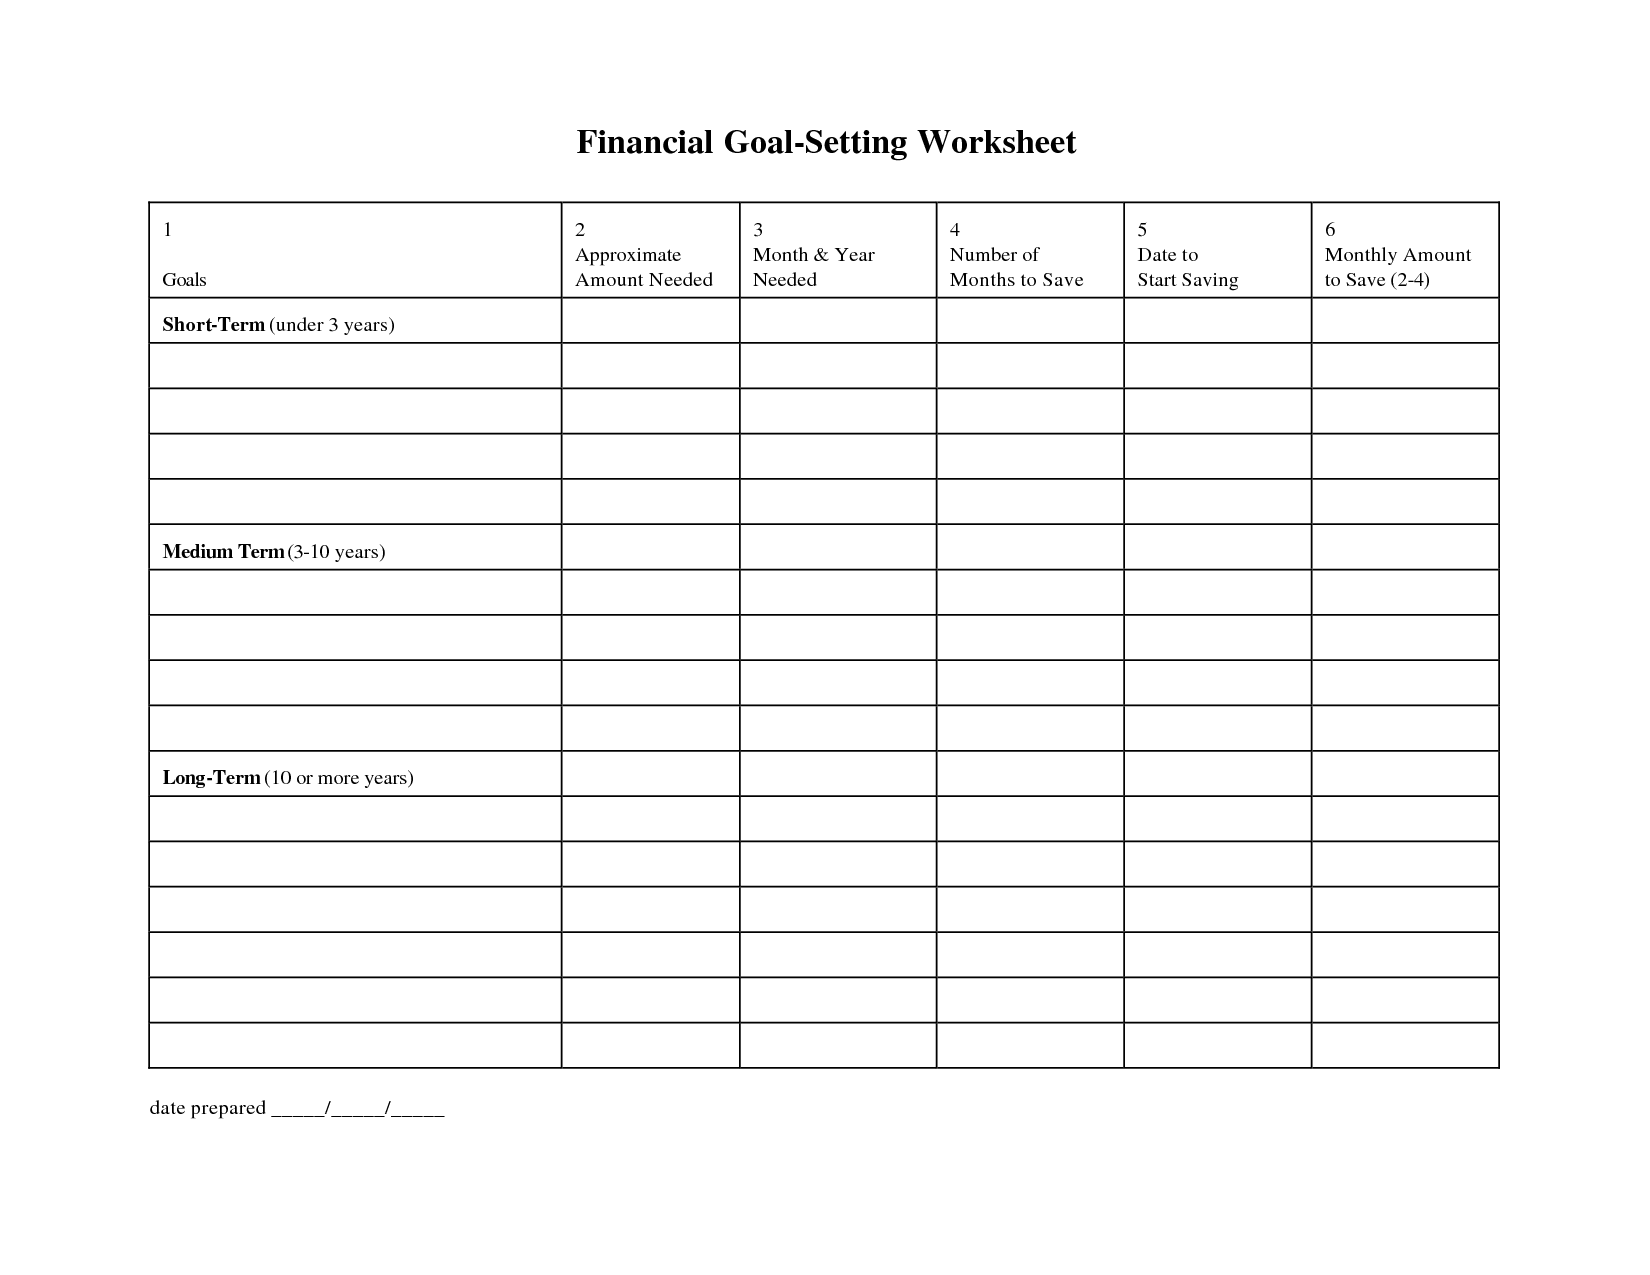 11-best-images-of-monthly-financial-planning-worksheets-monthly